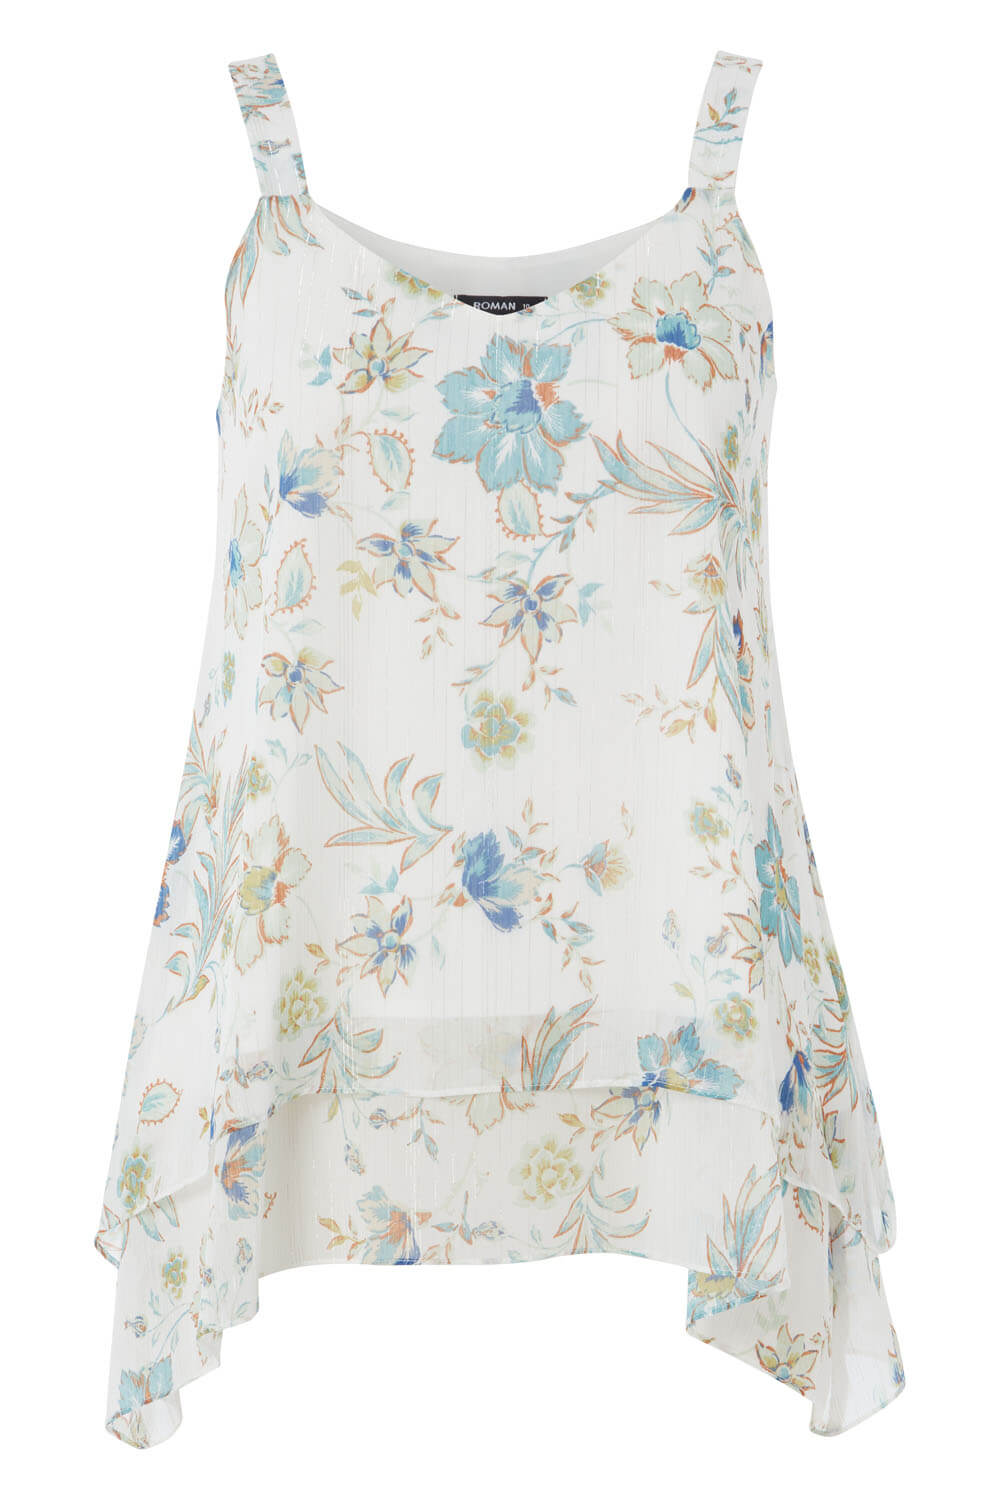 Floral Shimmer Camisole Top in Ivory - Roman Originals UK